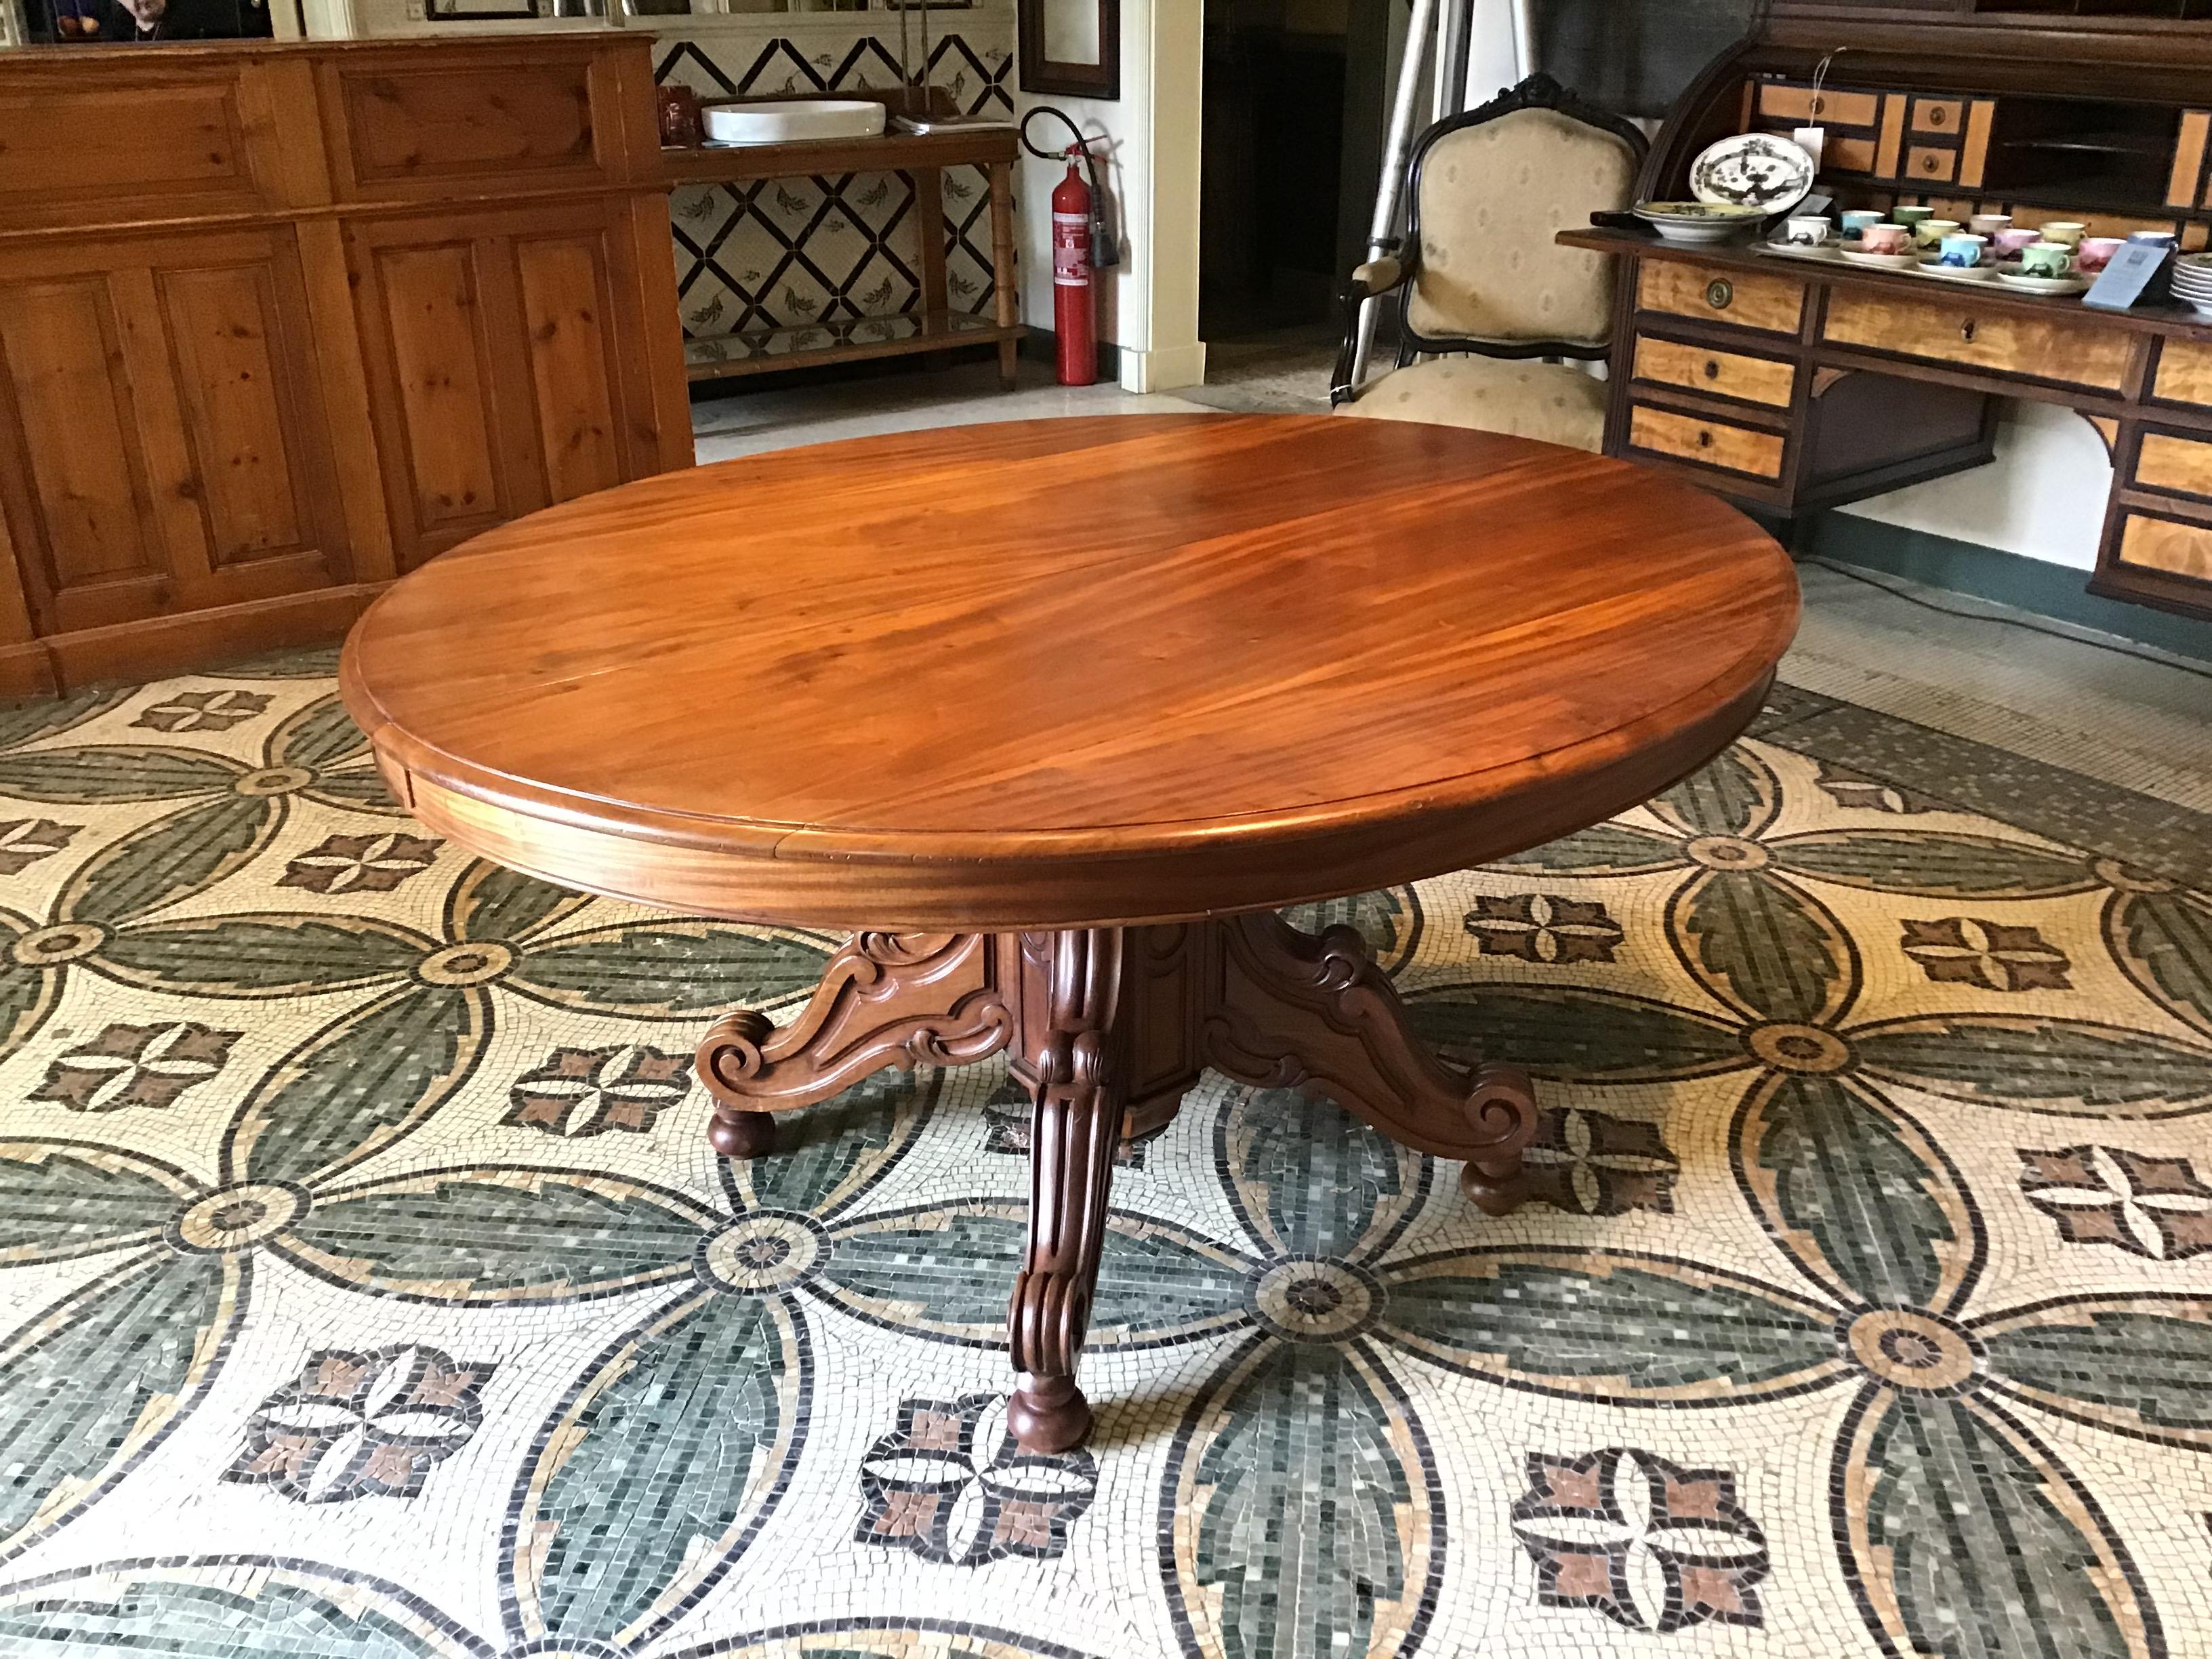 19th century English Mahogany extendible oval dining table, 1890s.
Measurements: Length from cm.125 to cm.440, Depth cm.146, Height cm.72